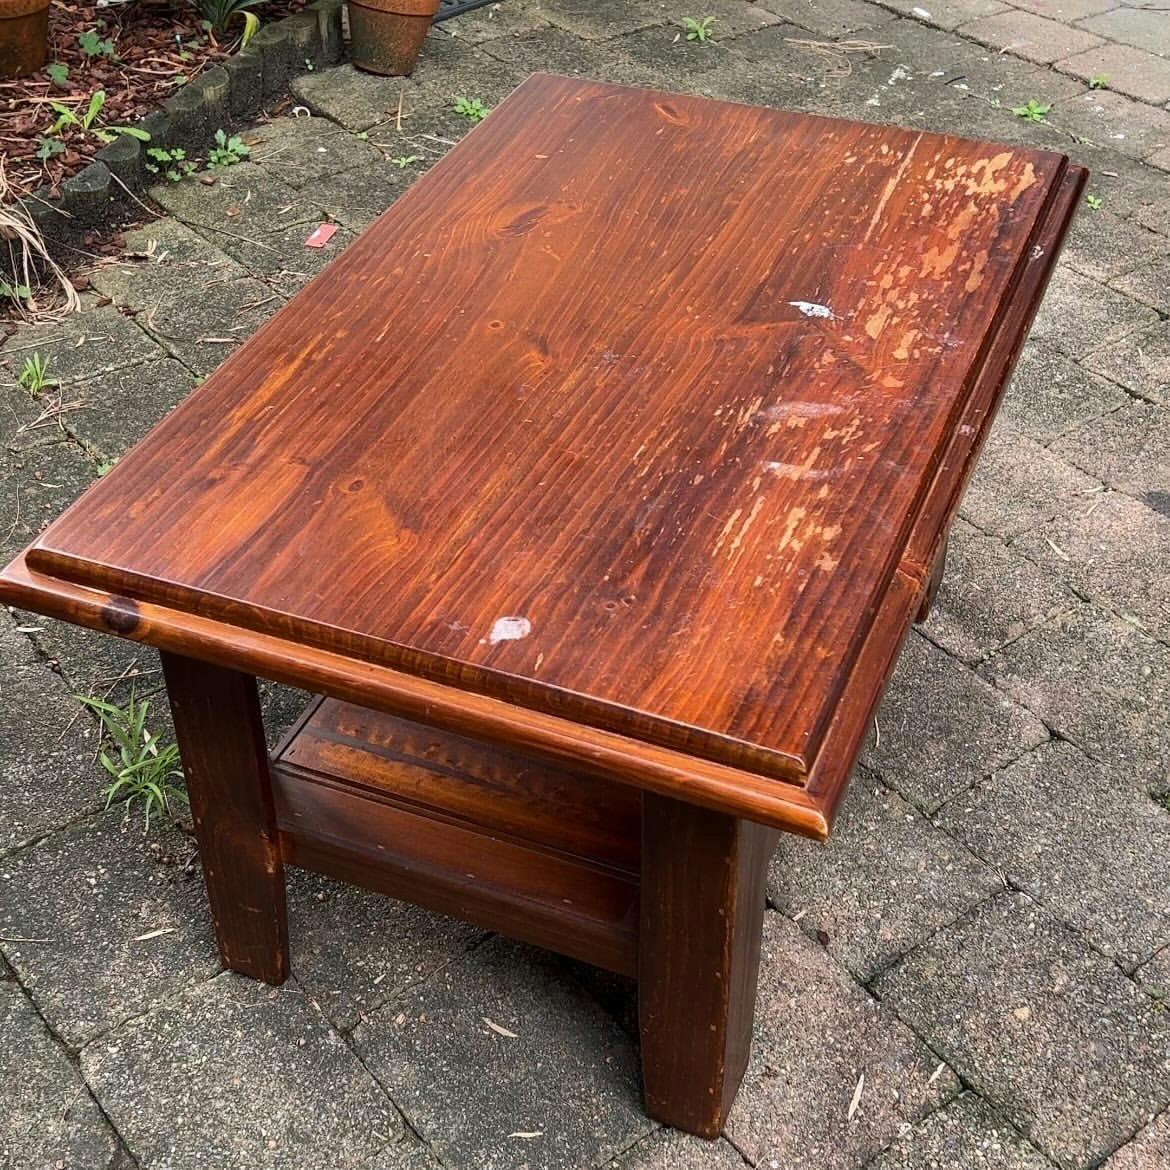 Preloved coffee table